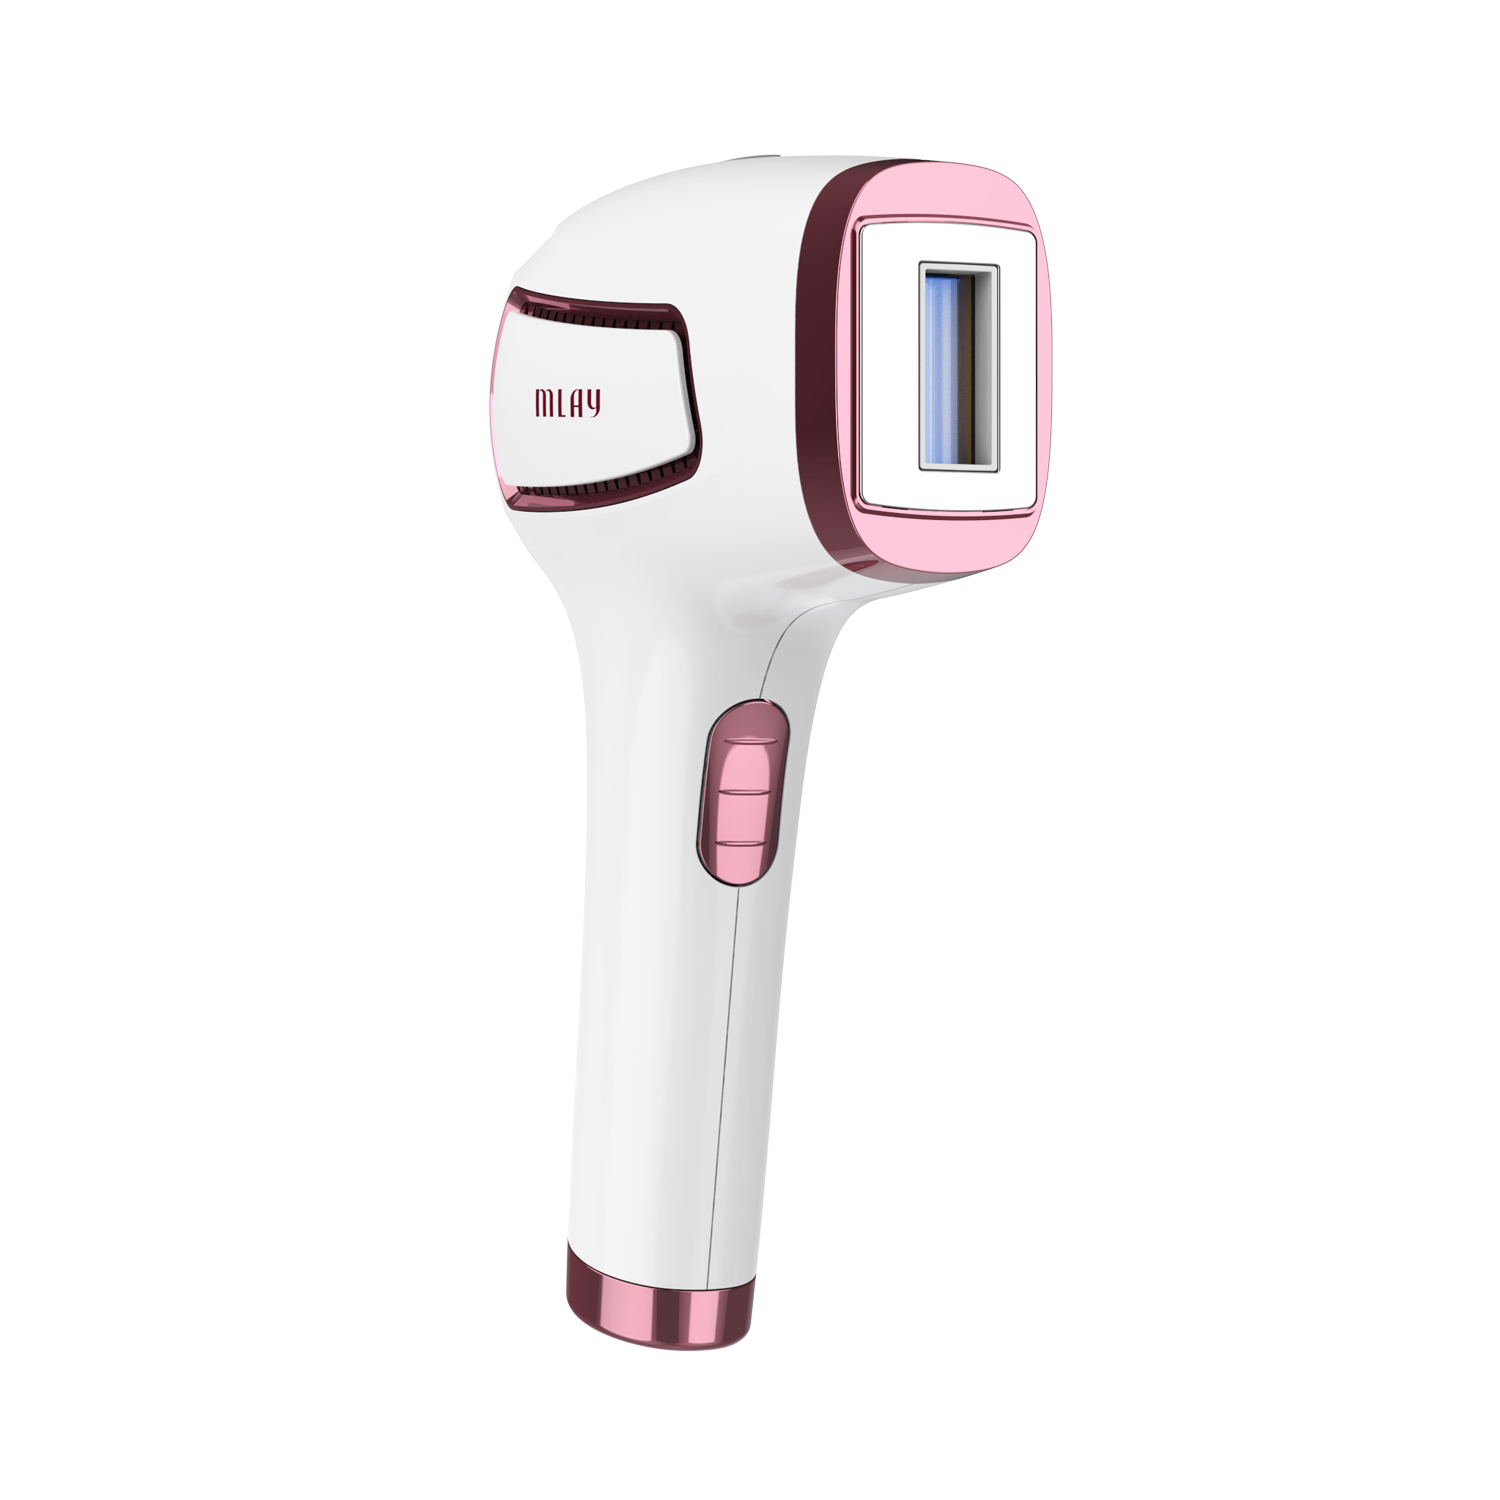 Home Use Portable Skin Rejuvenation Ipl Laser Hair Removal Machine Happy Skin 500000 Ice Cooling Ipl Hair Removal